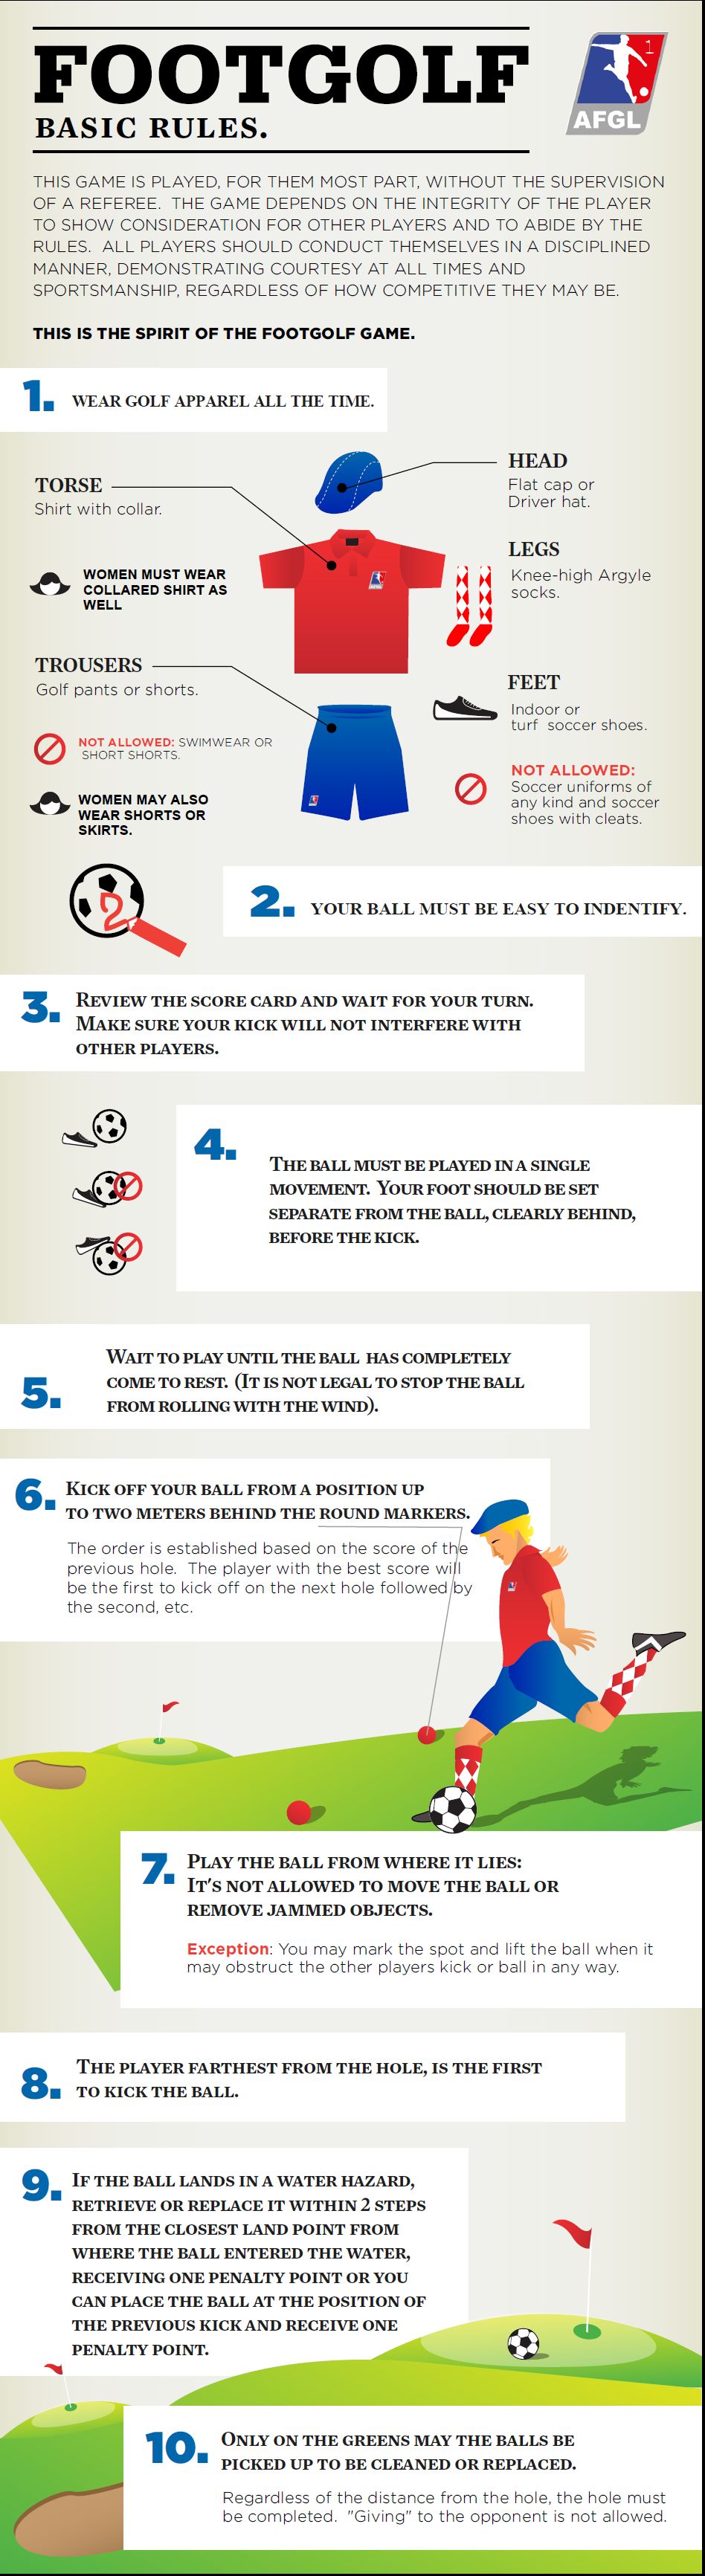 Rules_of_FootGolf